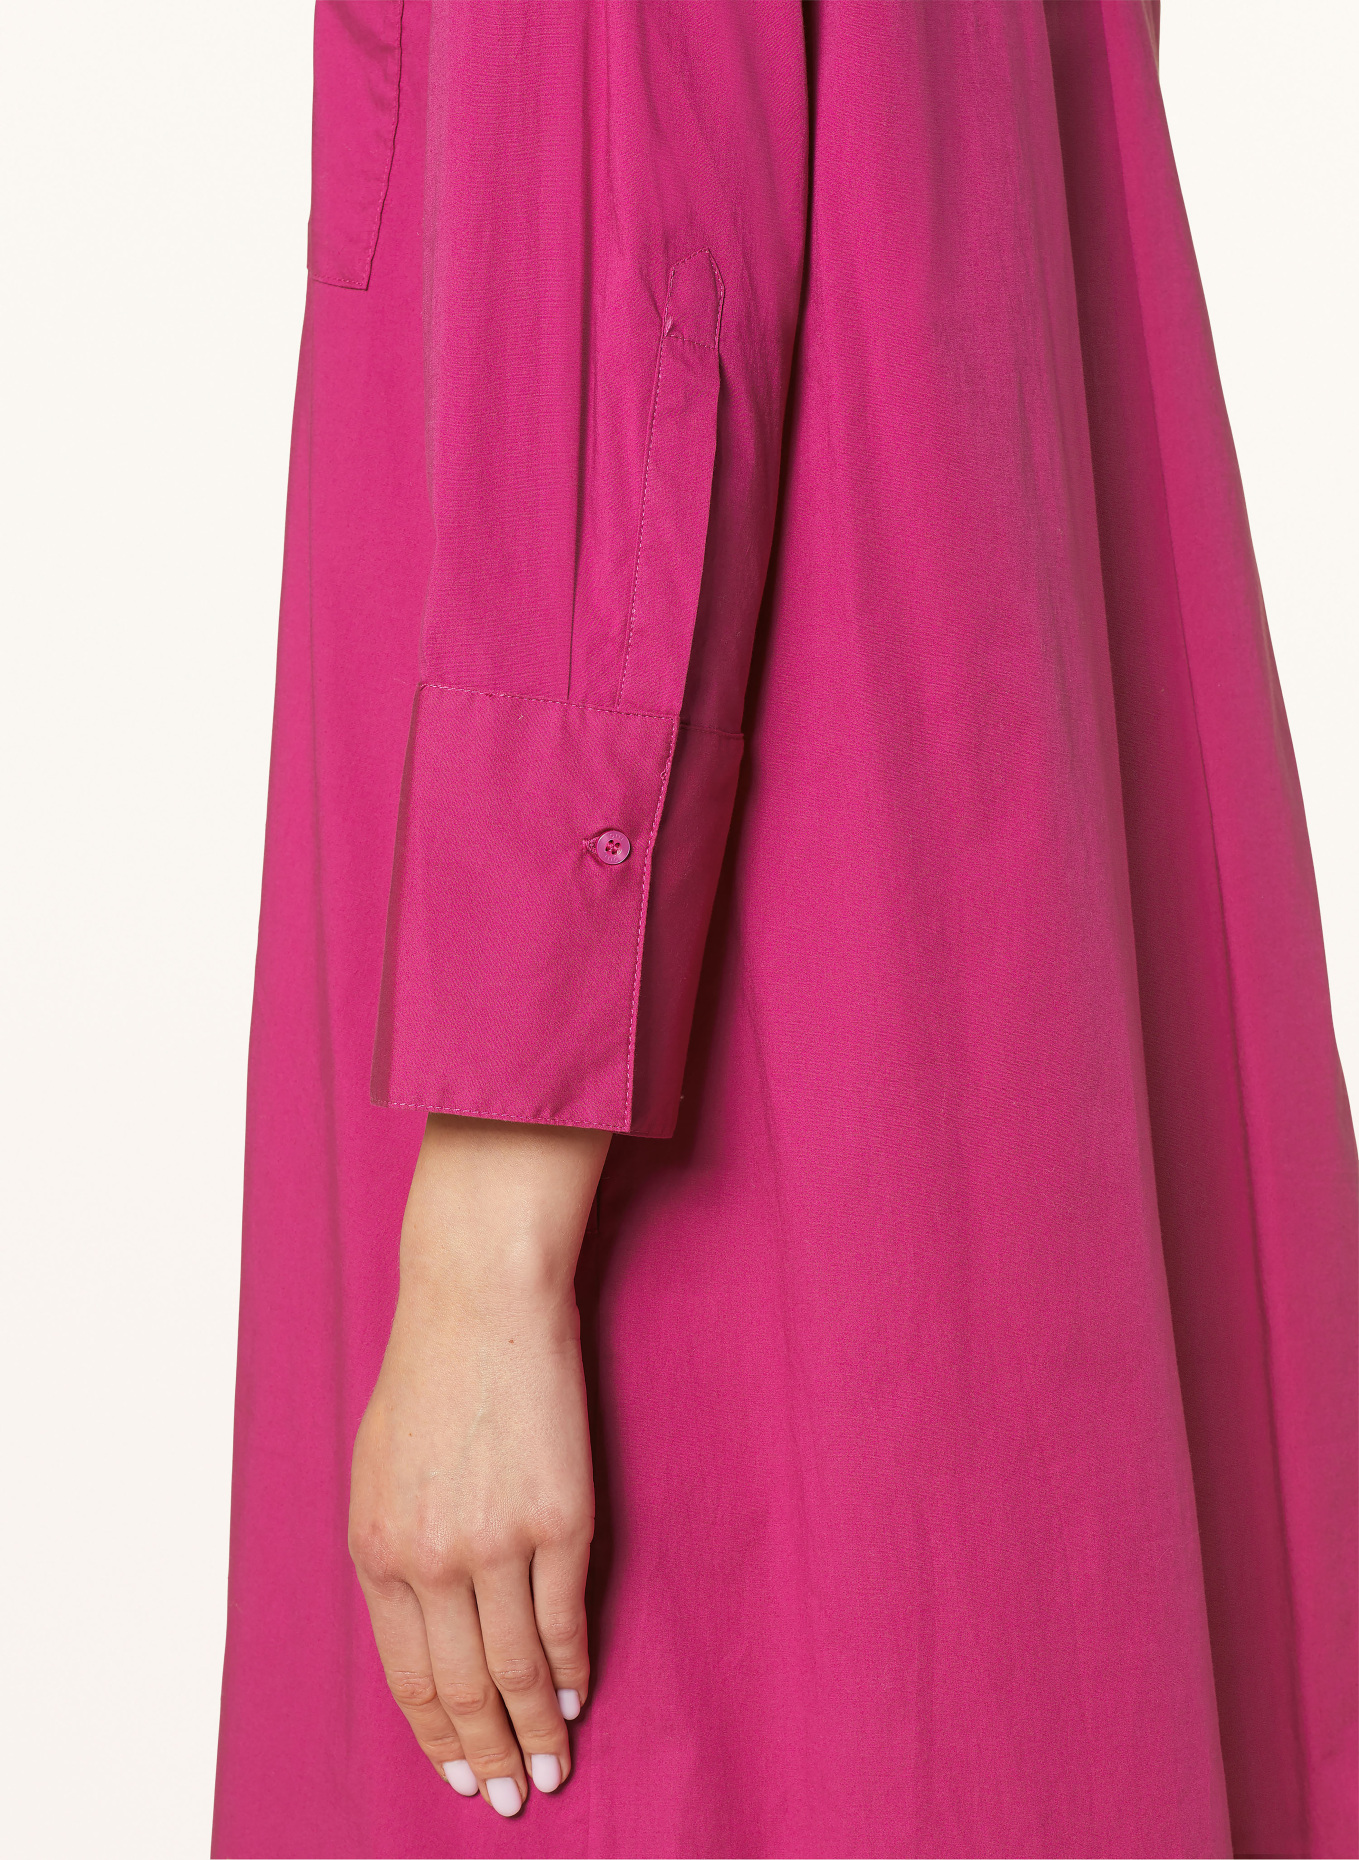 oui Shirt dress with 3/4 sleeves, Color: PINK (Image 5)